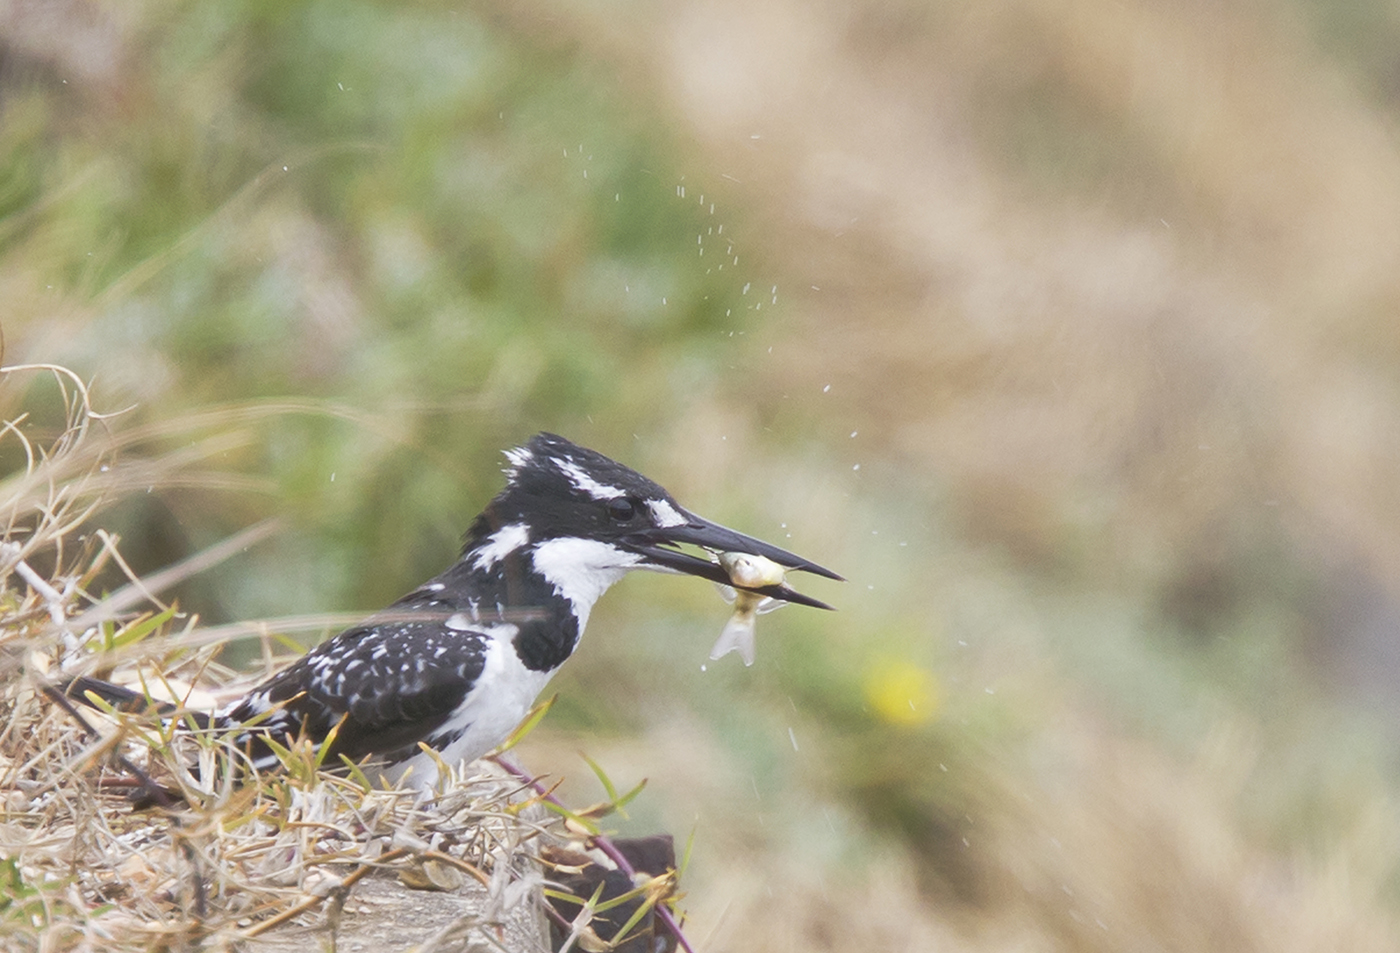 Pied Kingfisher, South Africa